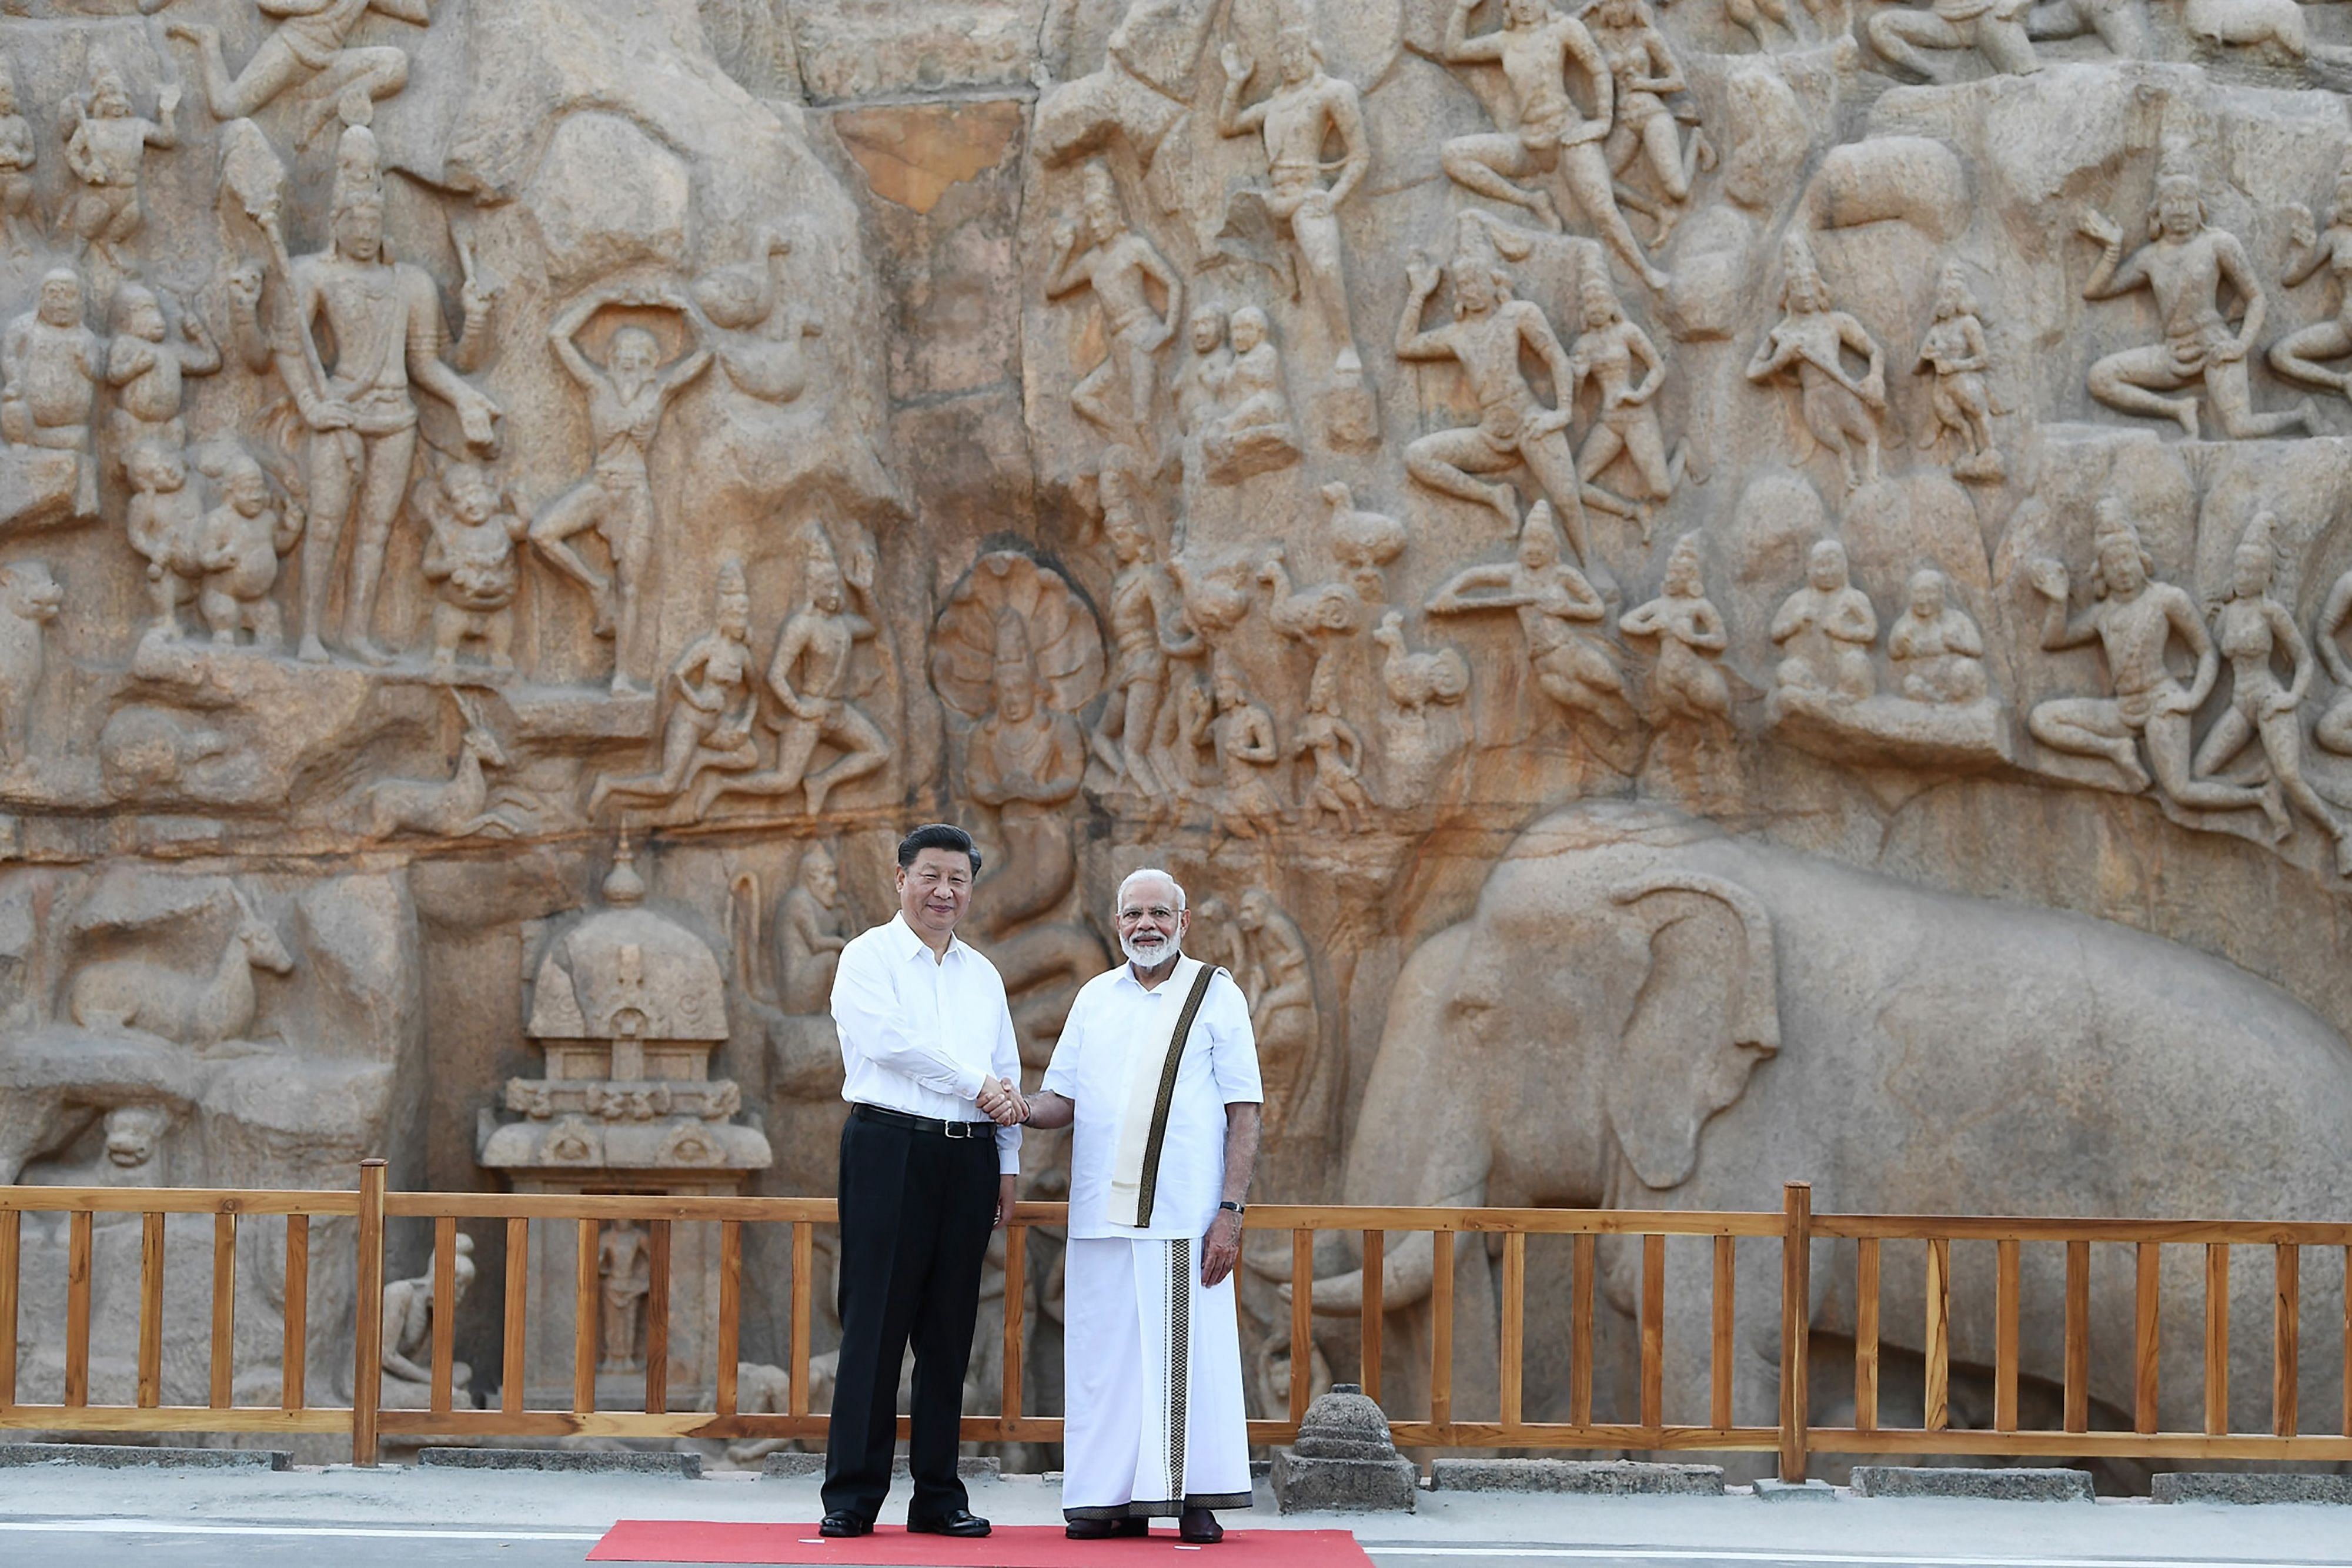 Prime Minister Narendra Modi (R) shakes hands with Chinese President Xi Jinping during their visit at at Arjuna's Penance, ahead of the summit at the World Heritage Site of Mahabalipuram in Tamil Nadu. (AFP Photo)